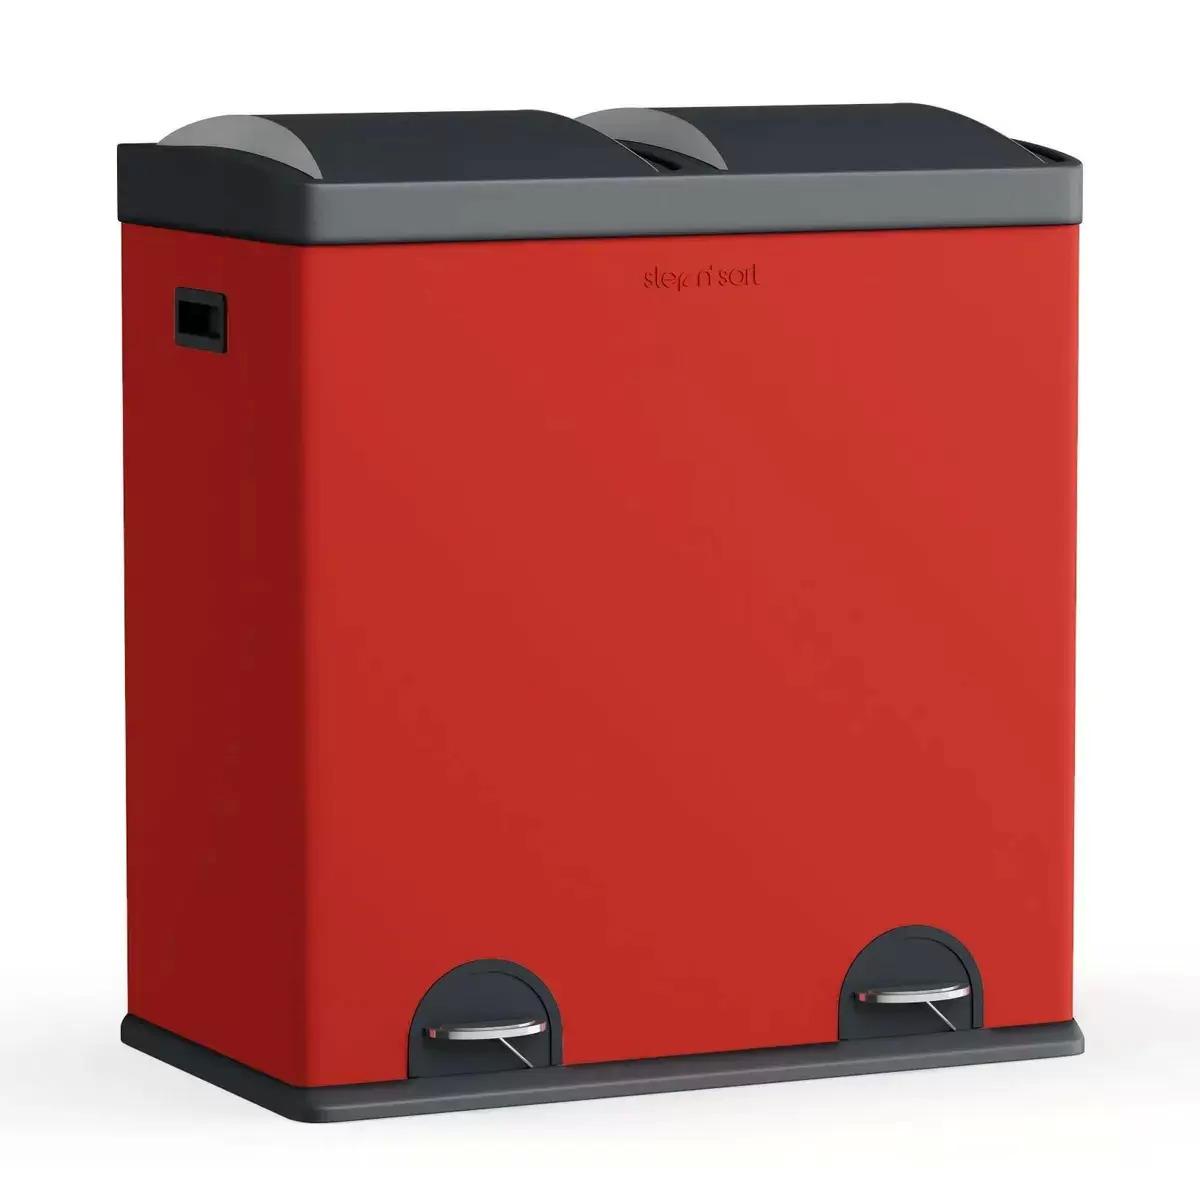 Step N Sort 2 Compartment Kitchen Trash Can and Recycling Bin for $44.96 Shipped